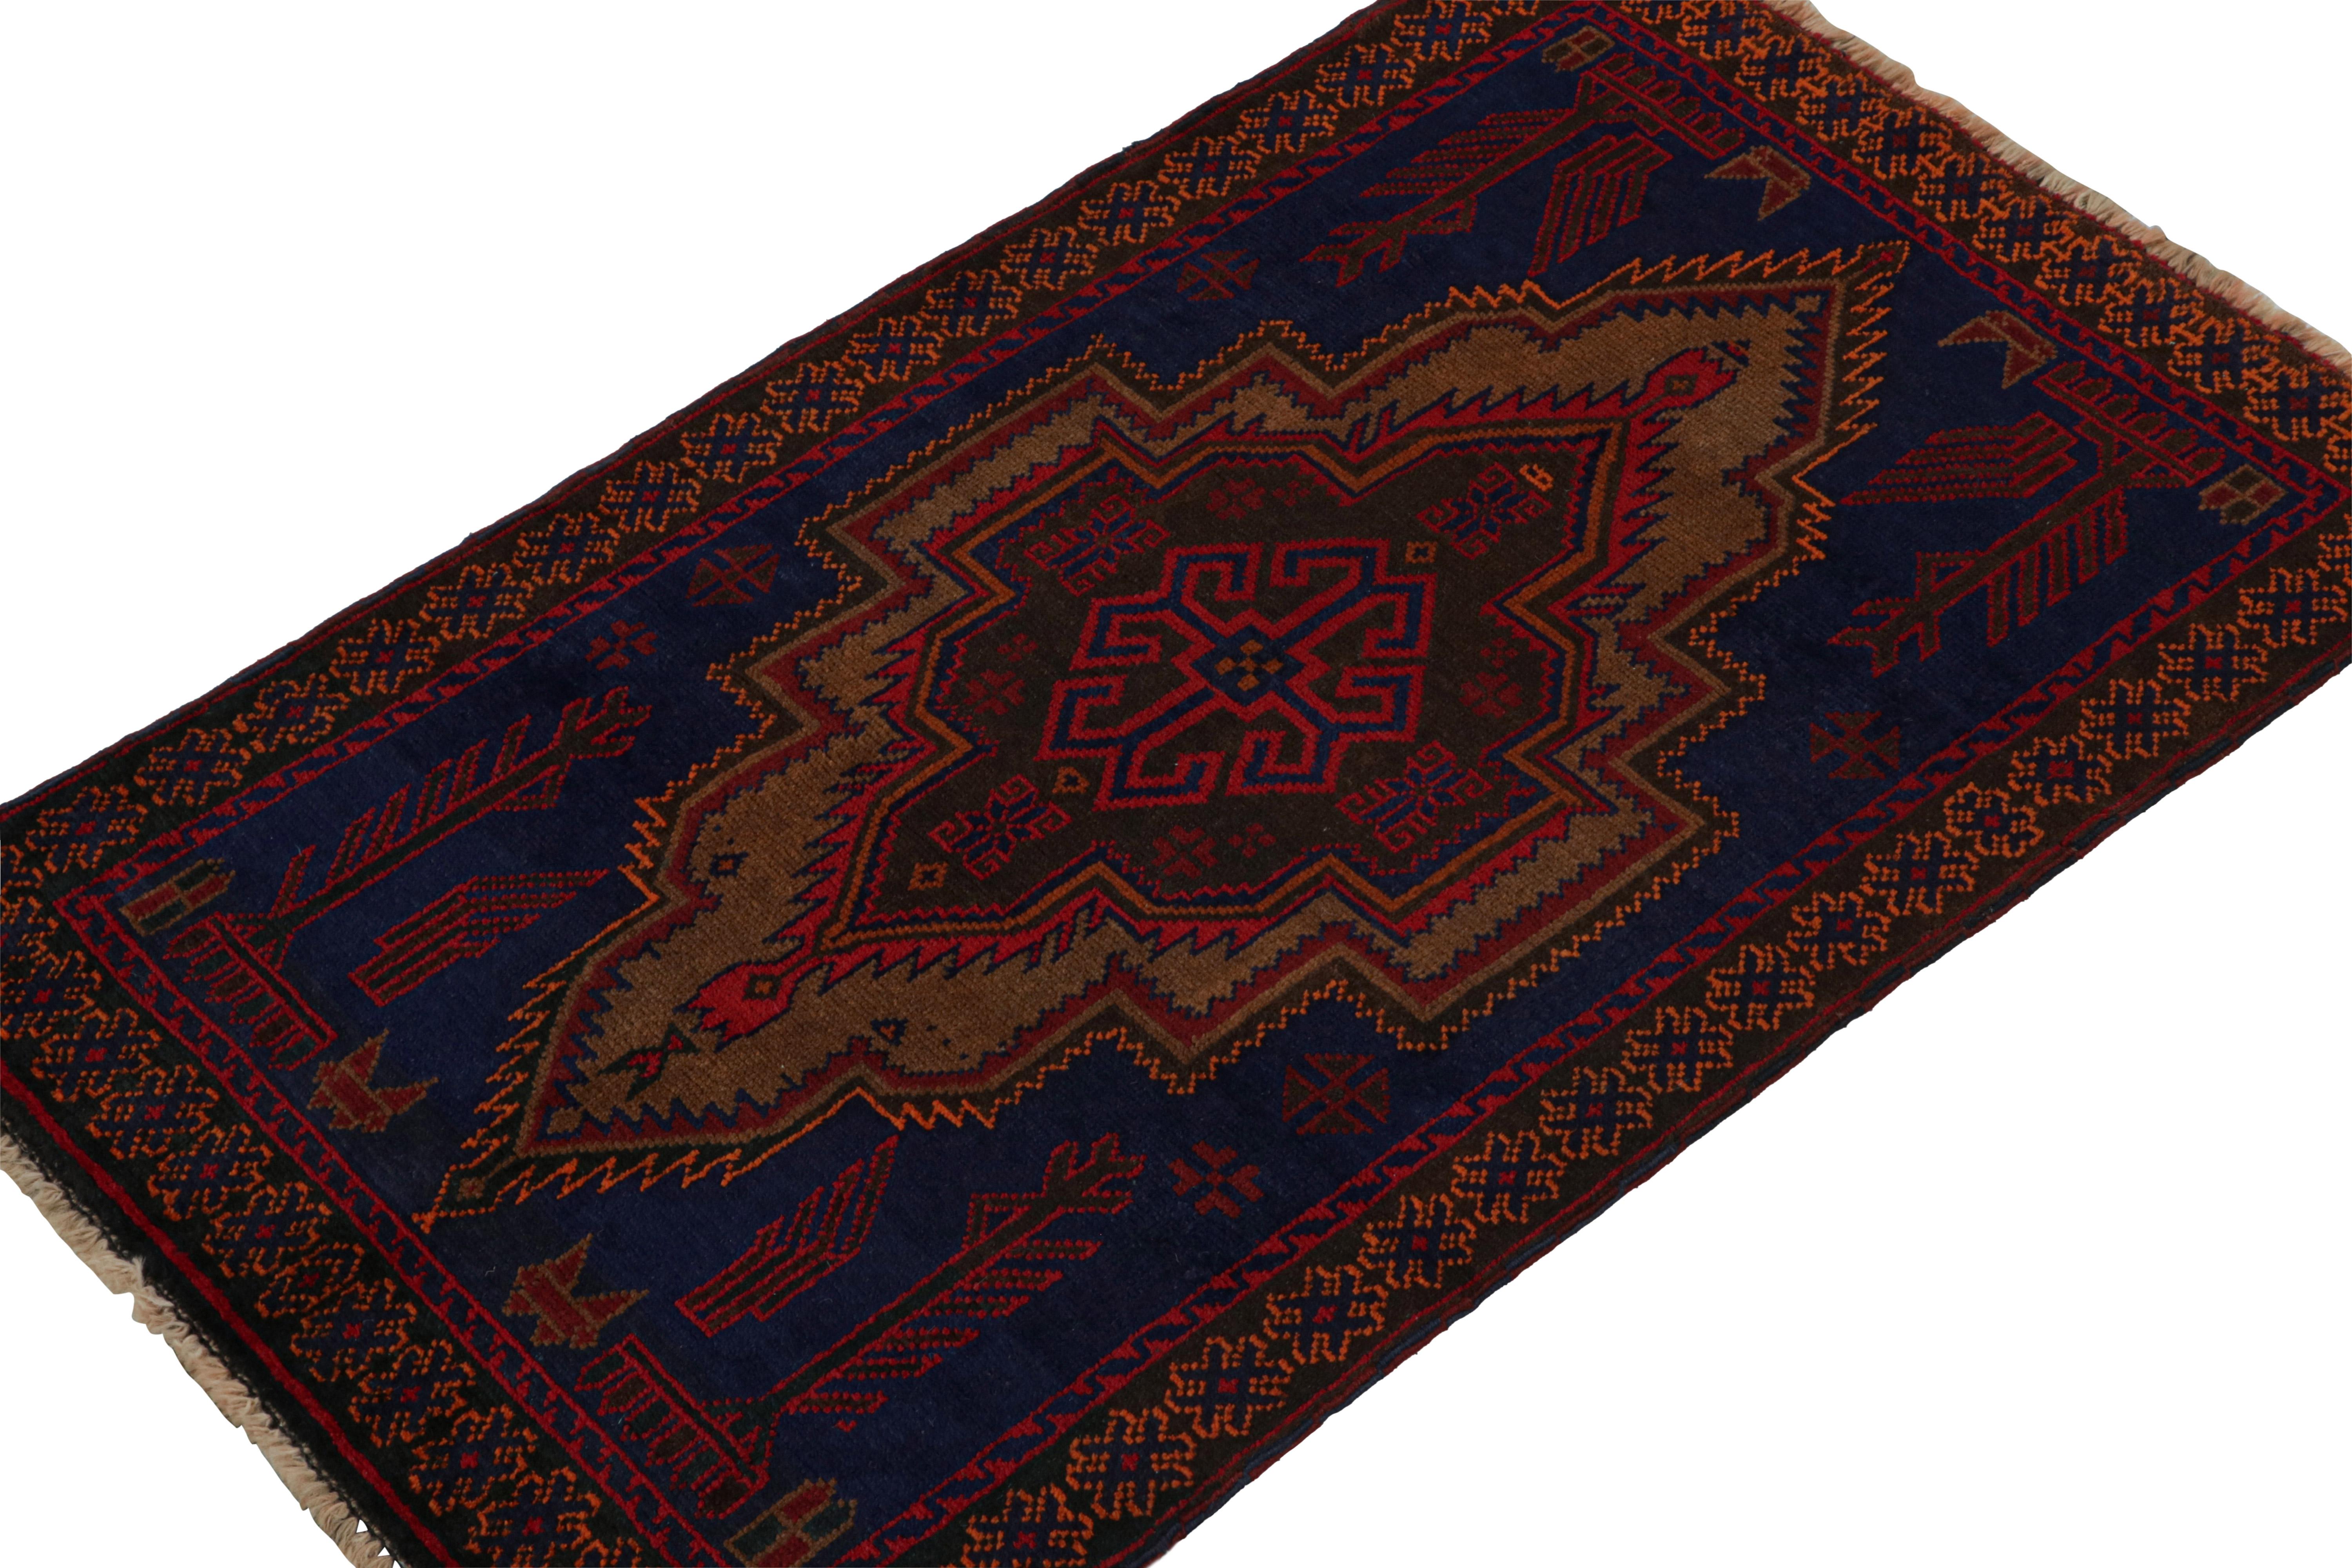 Hand-knotted in wool and goat hair circa 1950-1960, this 3x5 vintage Baluch tribal rug is a new curation from the Rug & Kilim collection.  

On the Design: 

This piece enjoys rich brown and red in a medallion on a navy blue field, and traditional